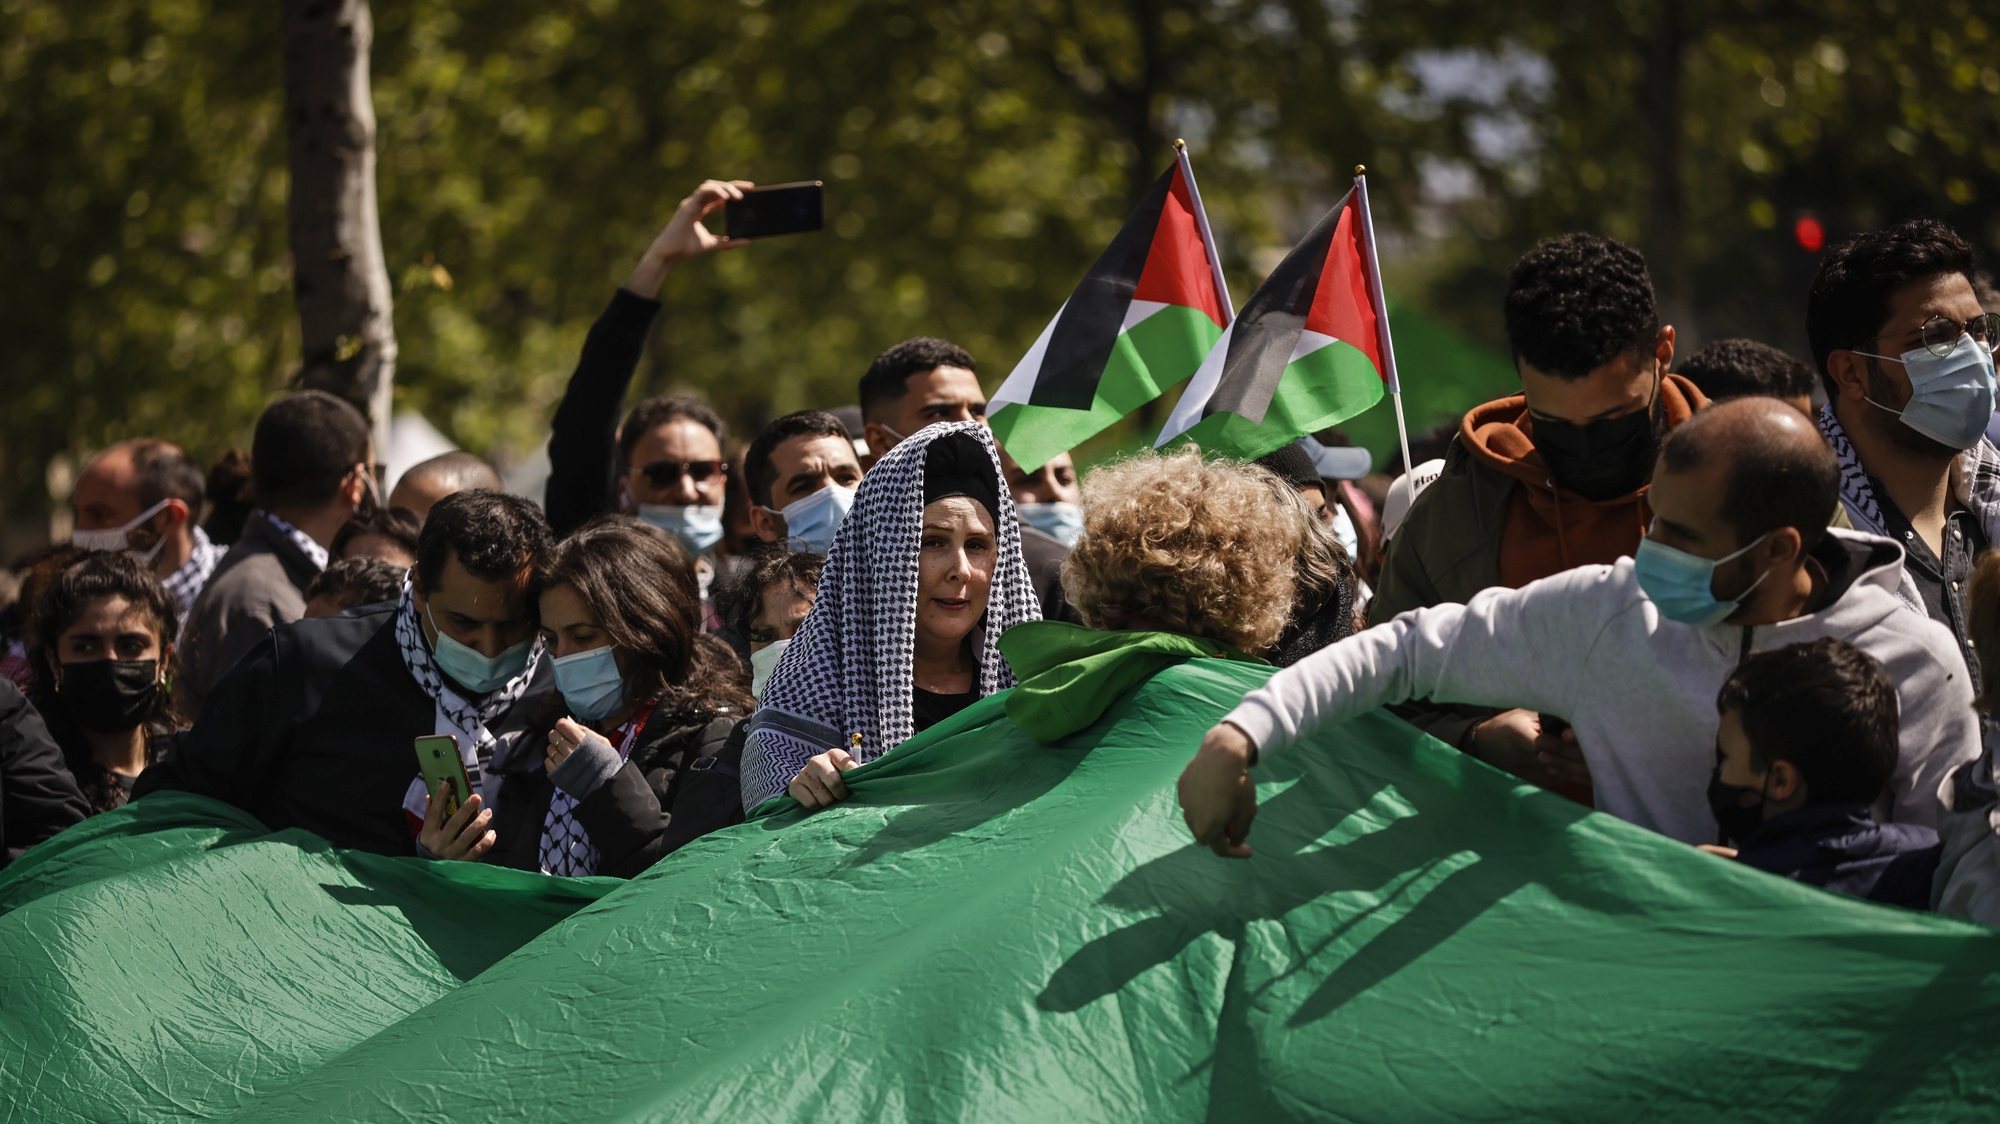 epa09220251 People wave Palestinian flags during a protest against Israel in solidarity with the Palestinian people, in Paris, France, 22 May 2021. Israel and Hamas have announced a cease fire following 11 days of violent confrontations.  EPA/YOAN VALAT